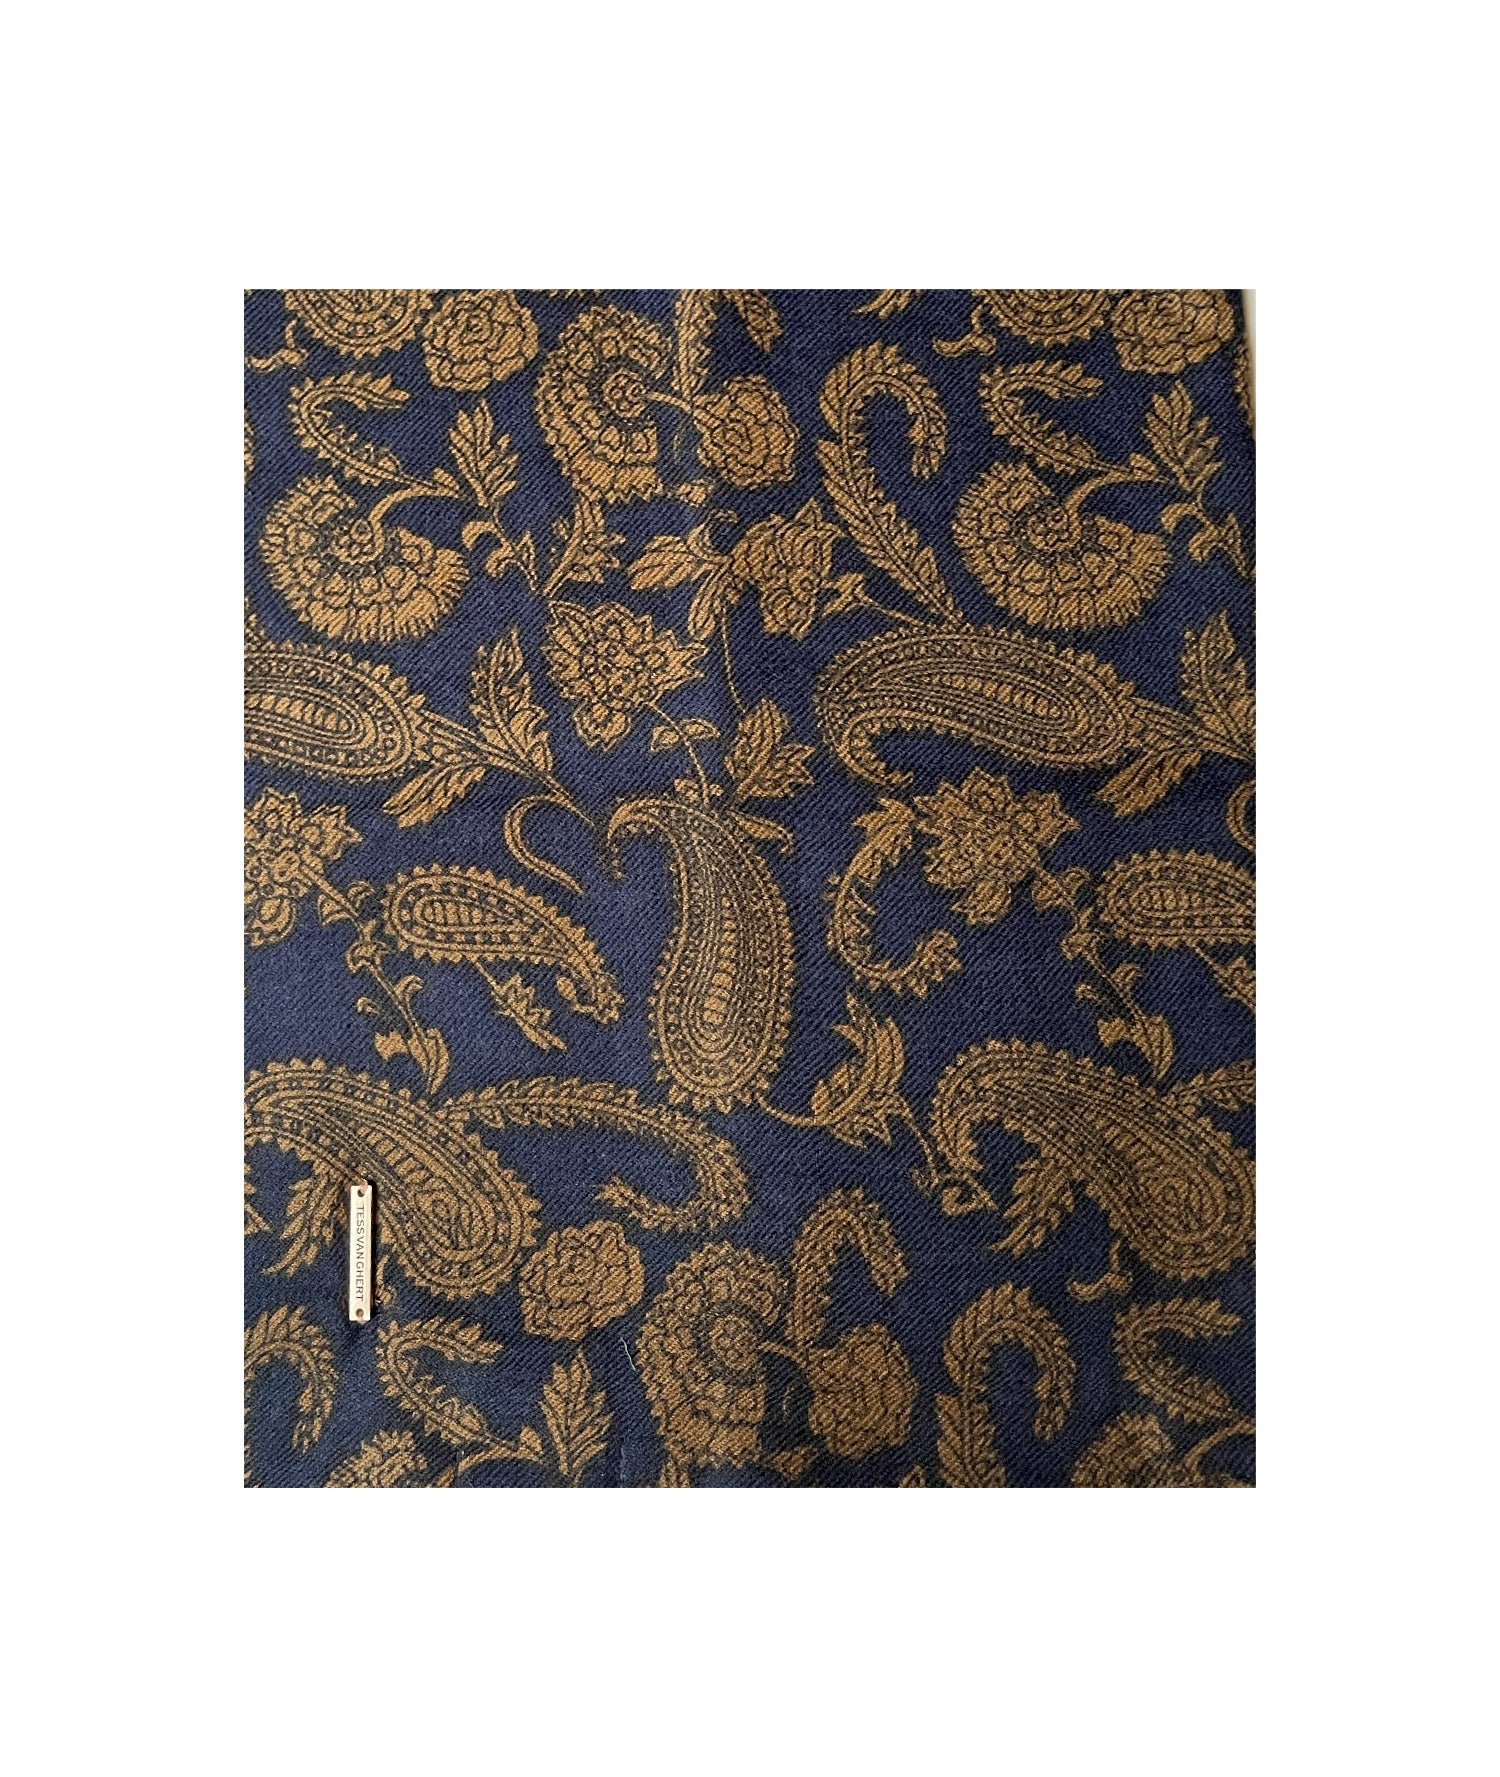 The Irreplaceable - Paisley pattern silk and cashmere scarf - Tess Van Ghert